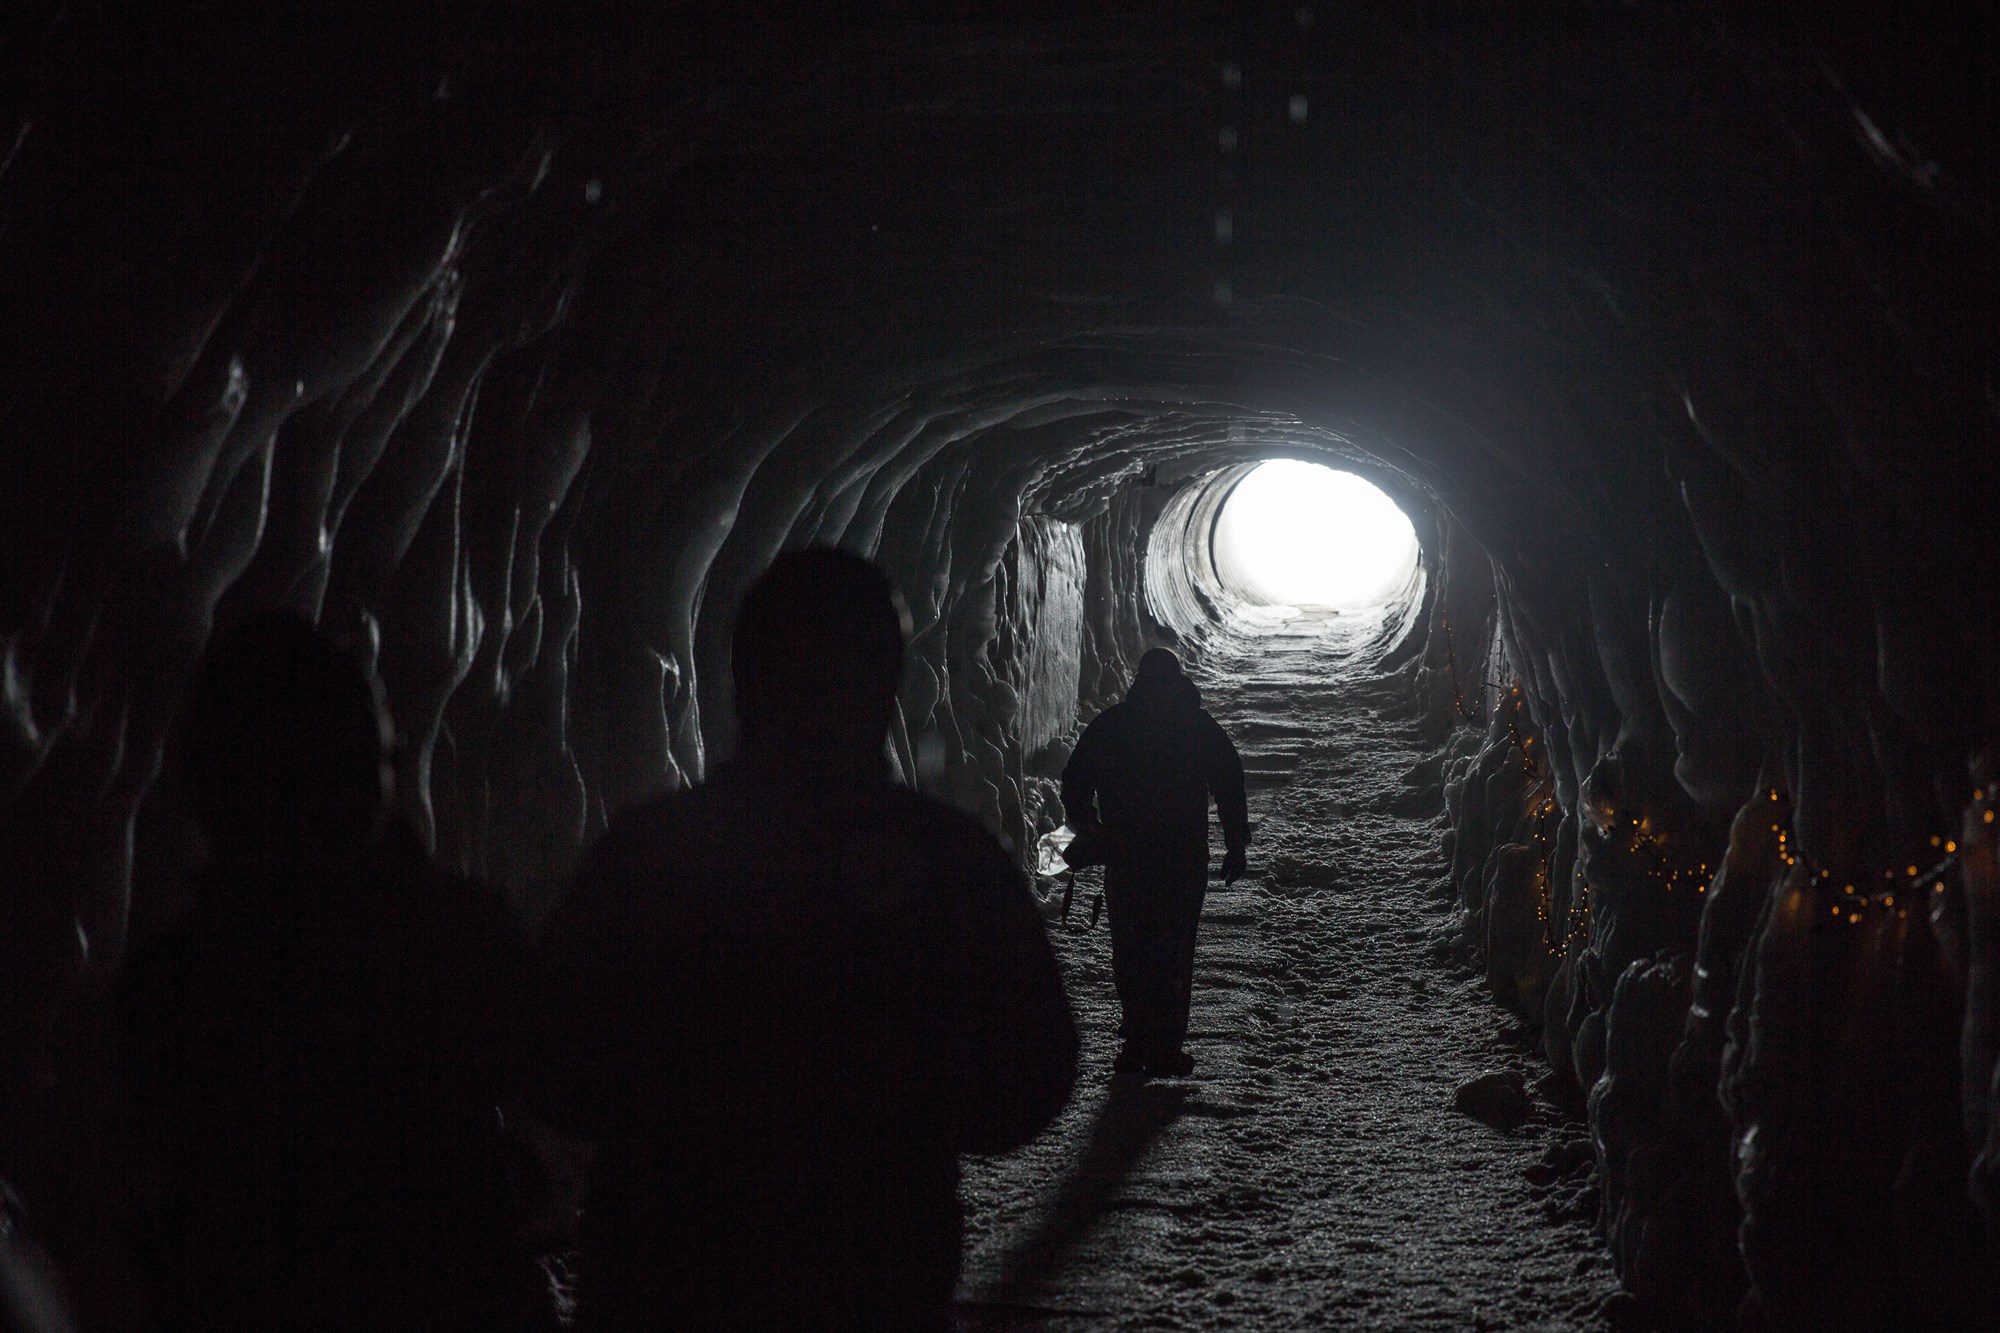  People walking through a dark tunnel towards the light in Iceland.